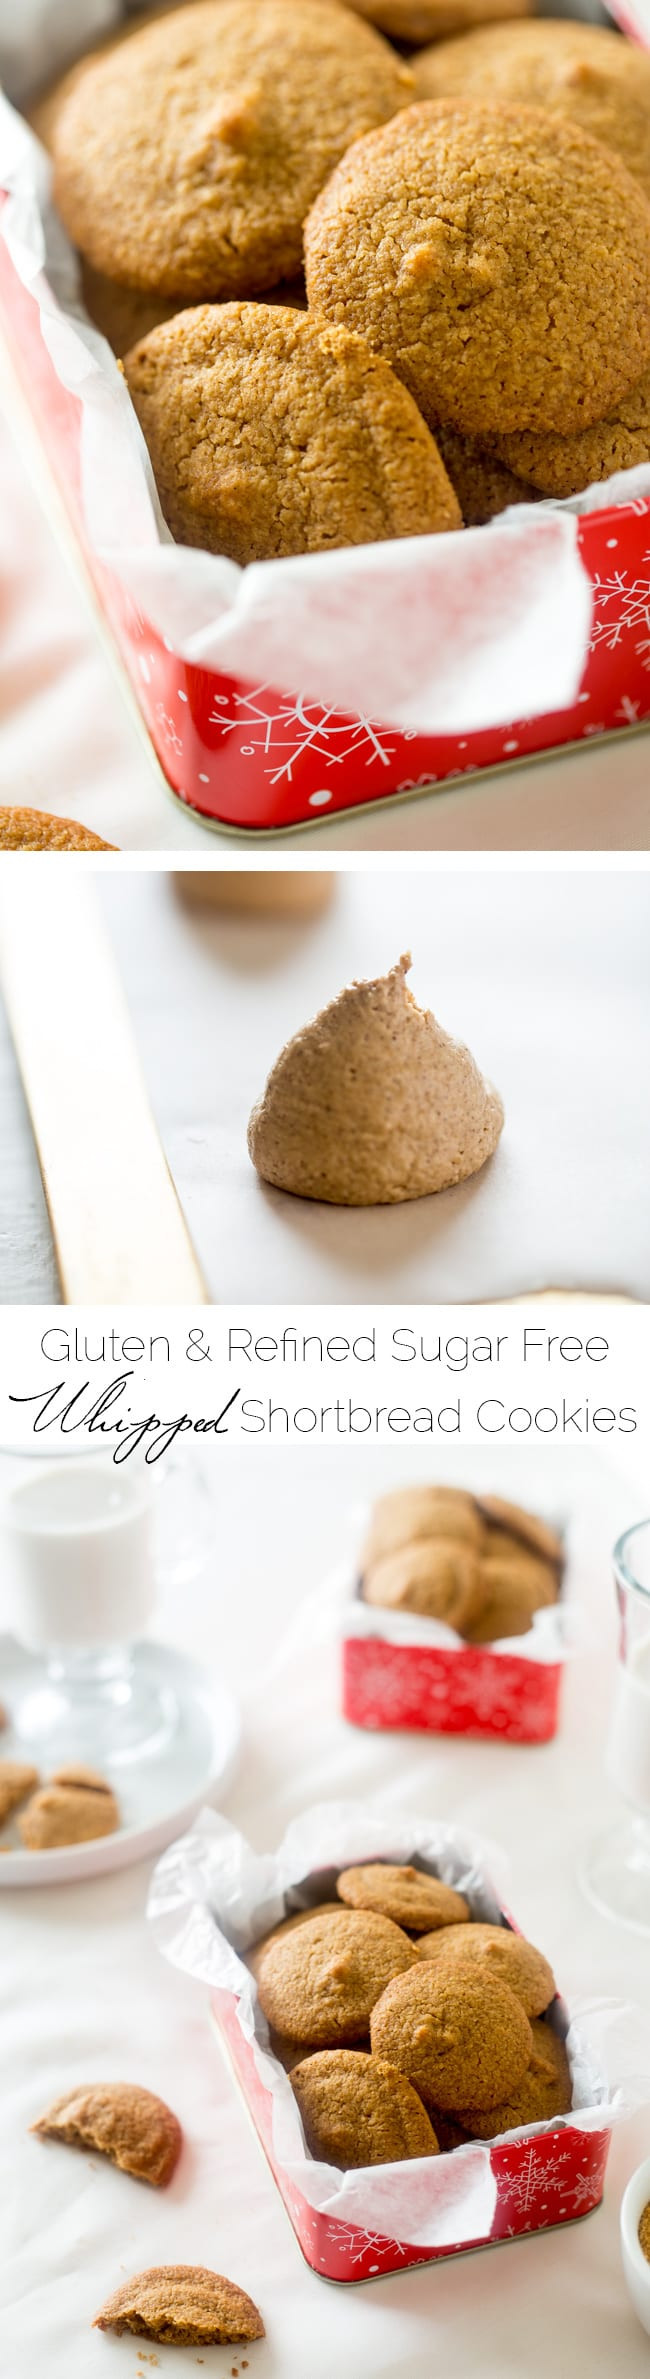 Dairy Free Shortbread Cookies
 Whipped Gluten Free Shortbread Cookies